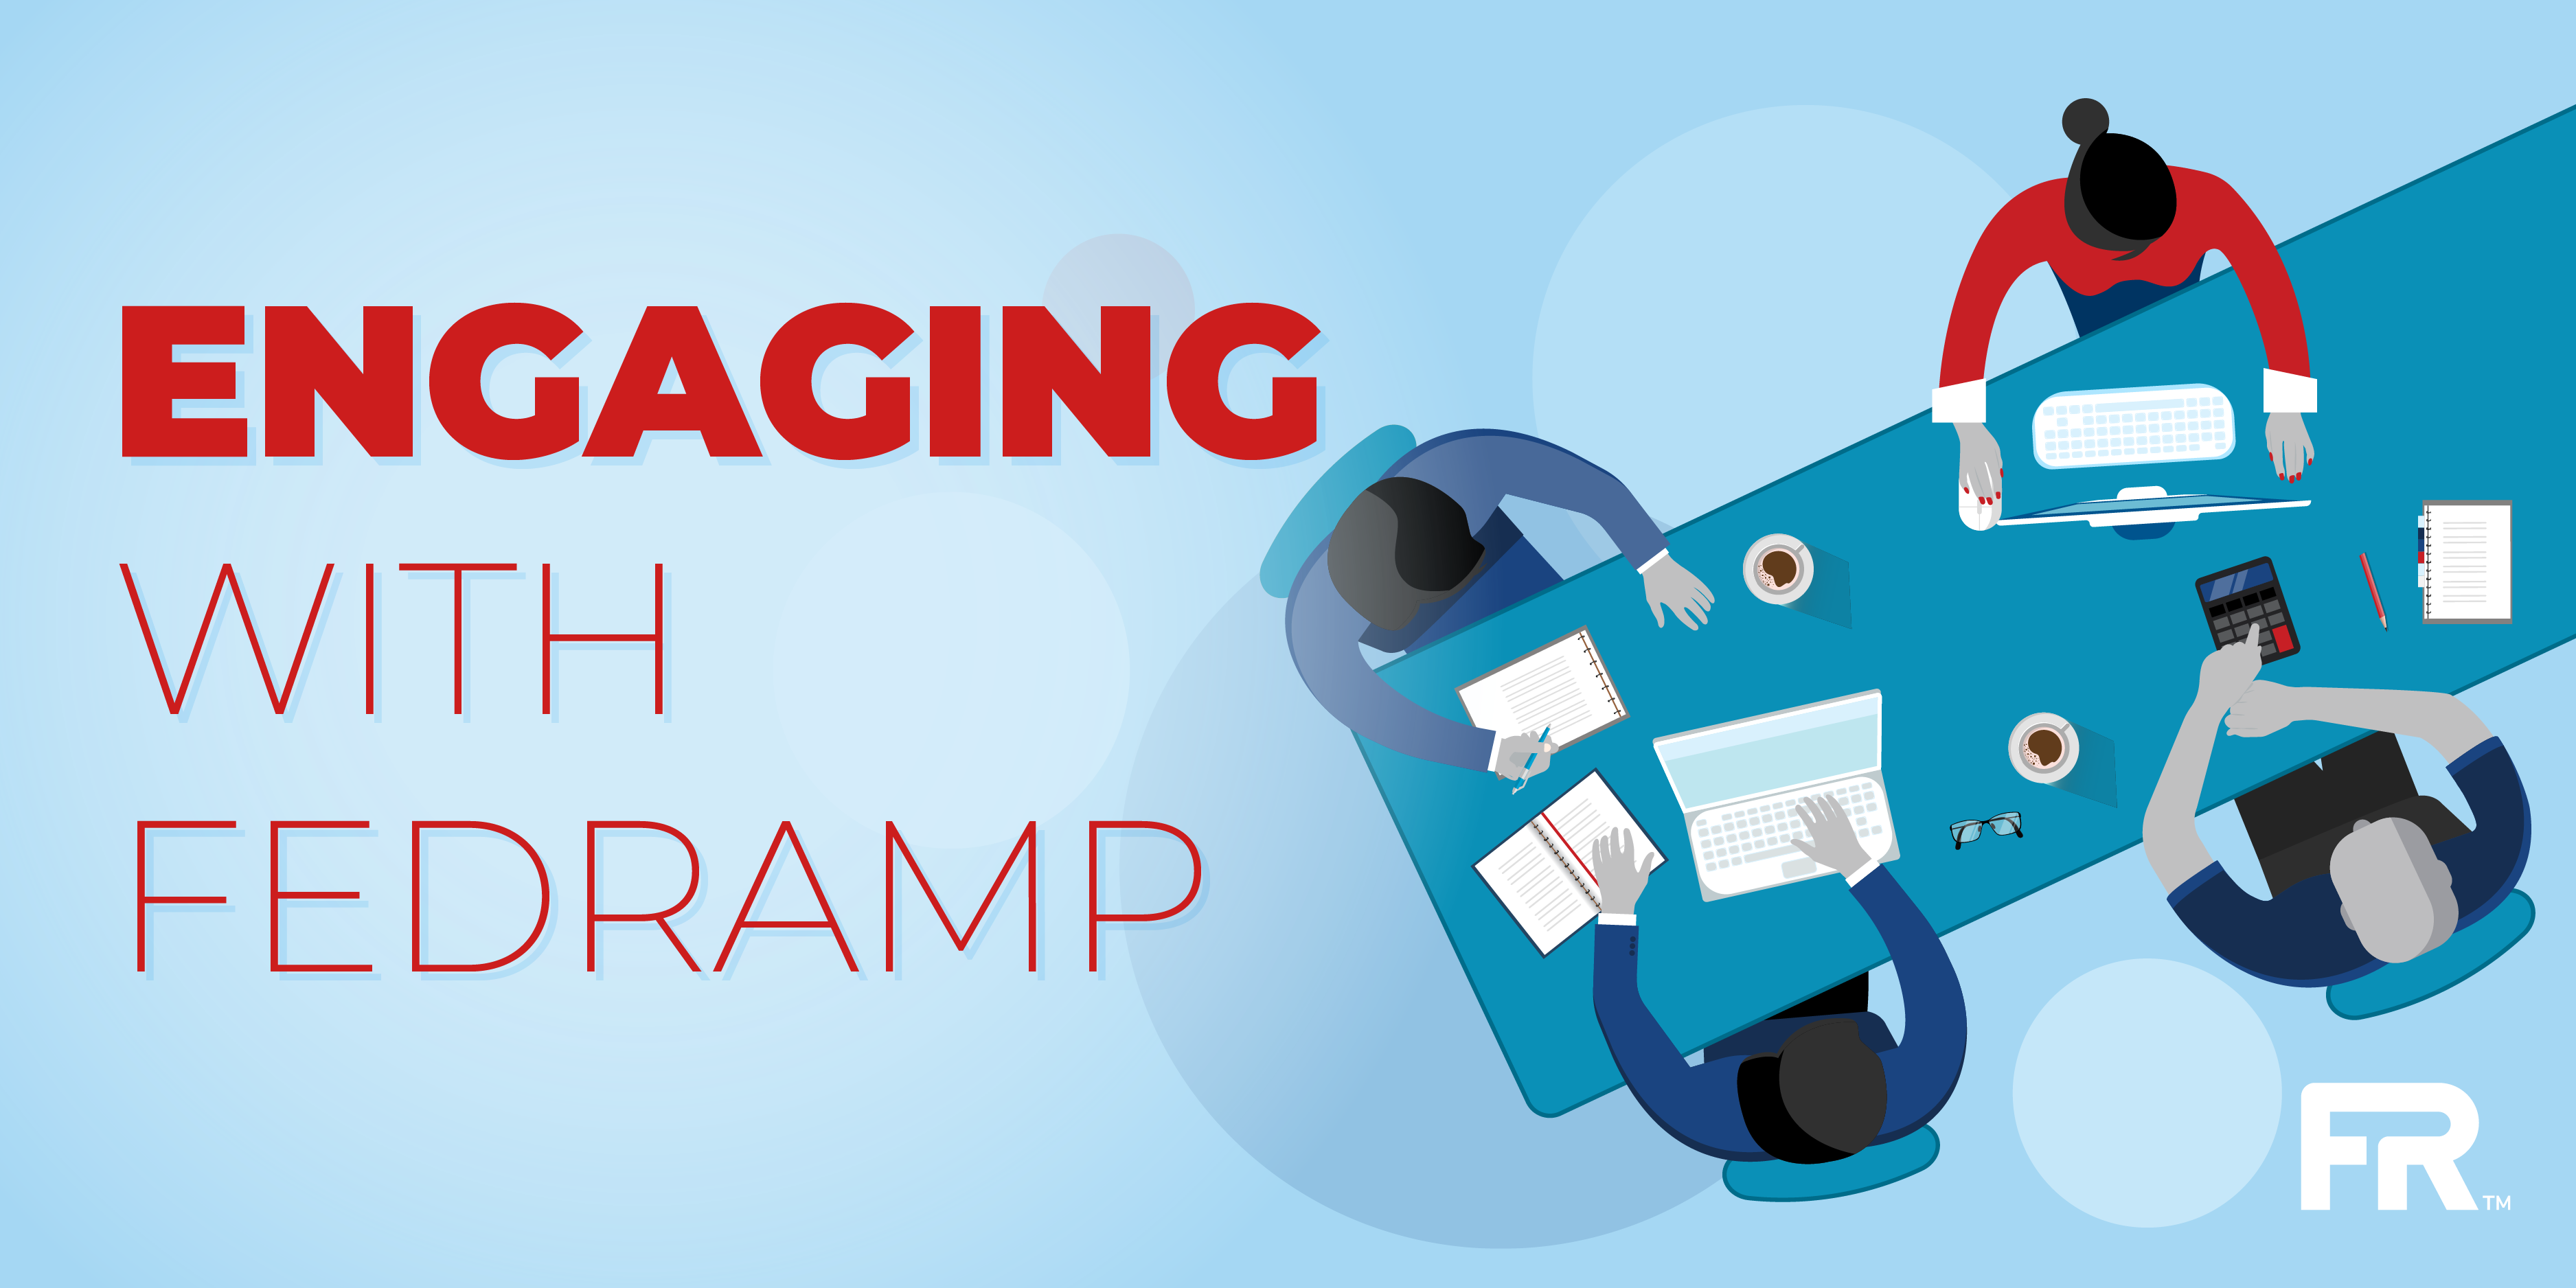 <b>Engaging with FedRAMP</b> - PART 1, The Intake Process